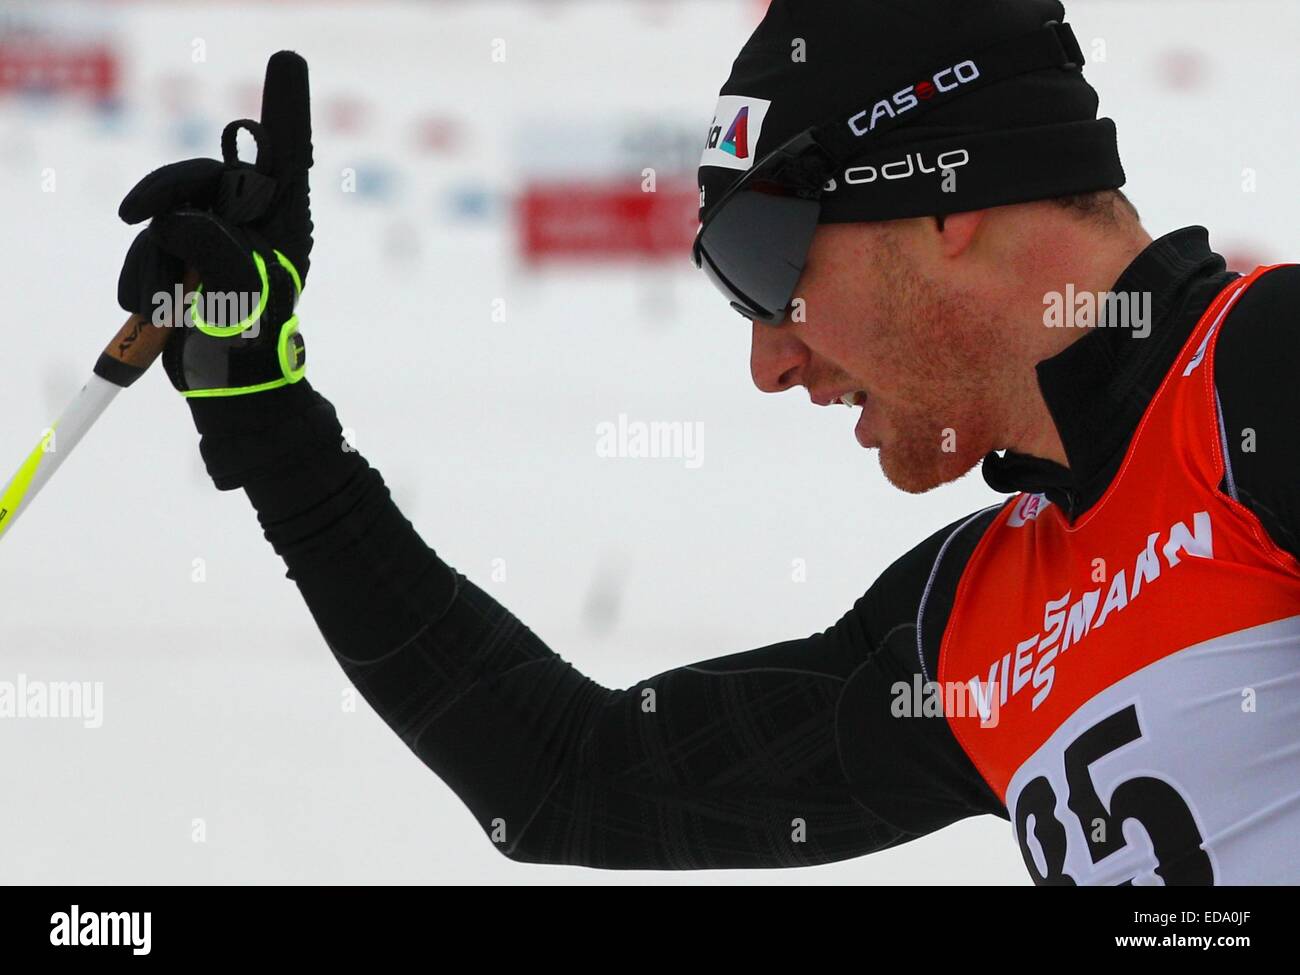 Dario Cologna of Switzerland celebrates after winning the men's opening prologue in cross-country skiing's Tour de Ski Saturday in Oberstdorf, Germany. Photo: Karl-Josef Hildenbrand /dpa Stock Photo